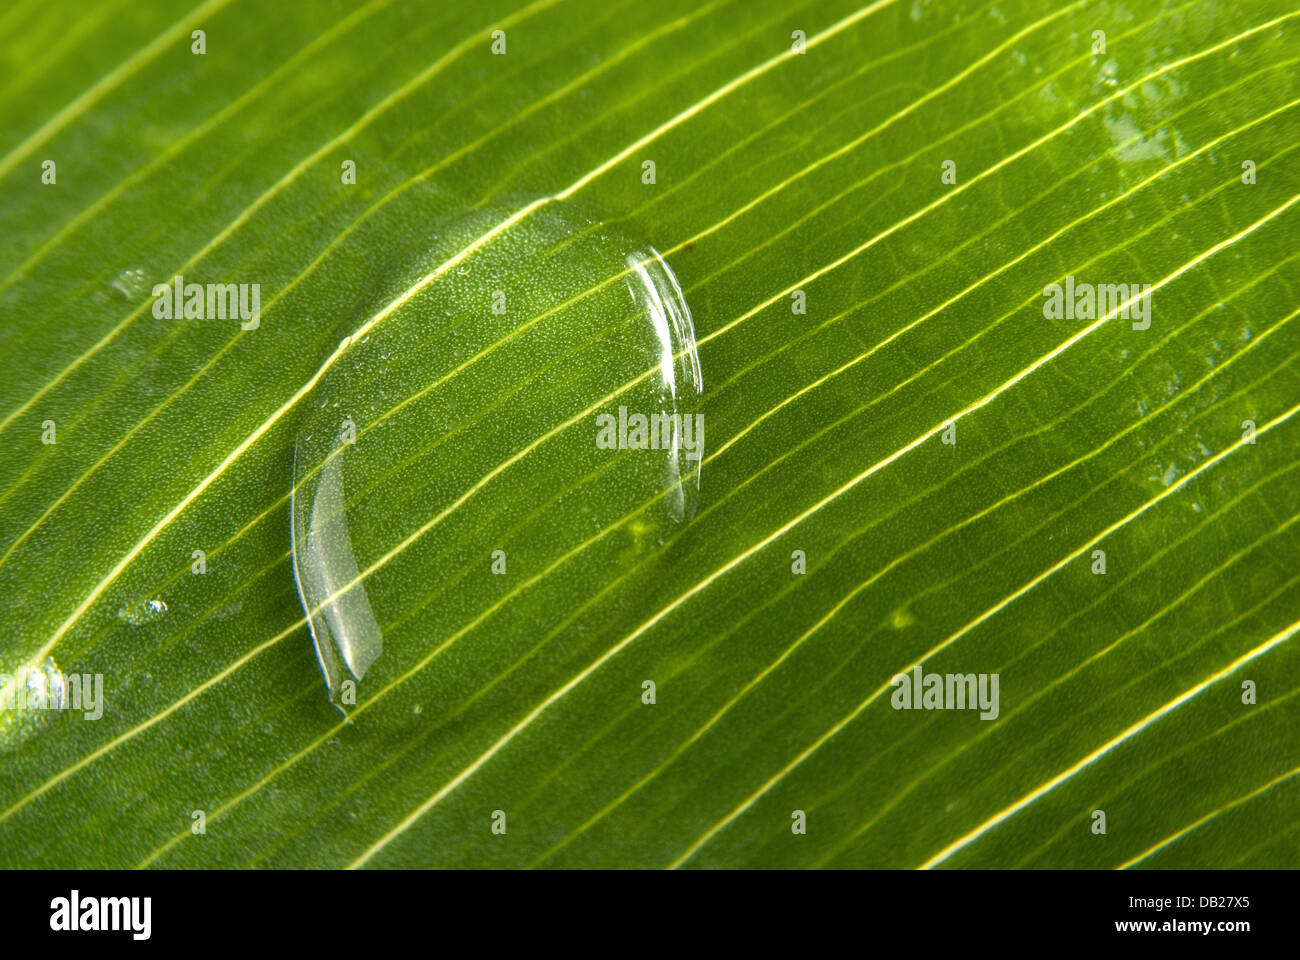 Macro green leaf with drops of water Stock Photo